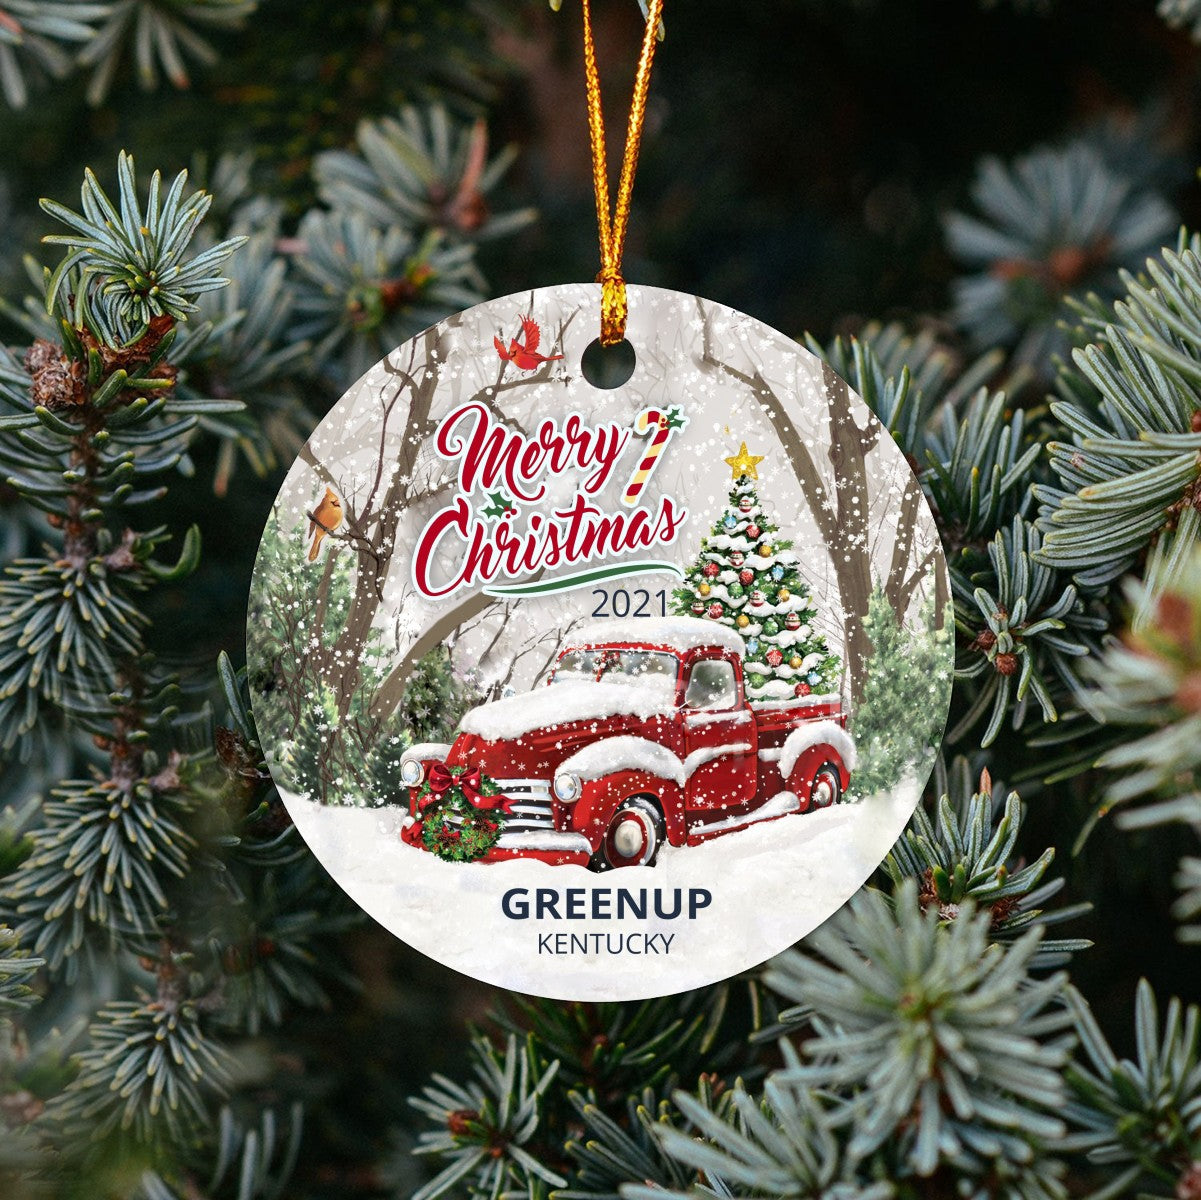 Christmas Tree Ornaments Greenup - Ornament Customize With Name City And State Greenup Kentucky KY - Red Truck Xmas Ornaments 3'' Plastic Gift For Family, Friend And Housewarming